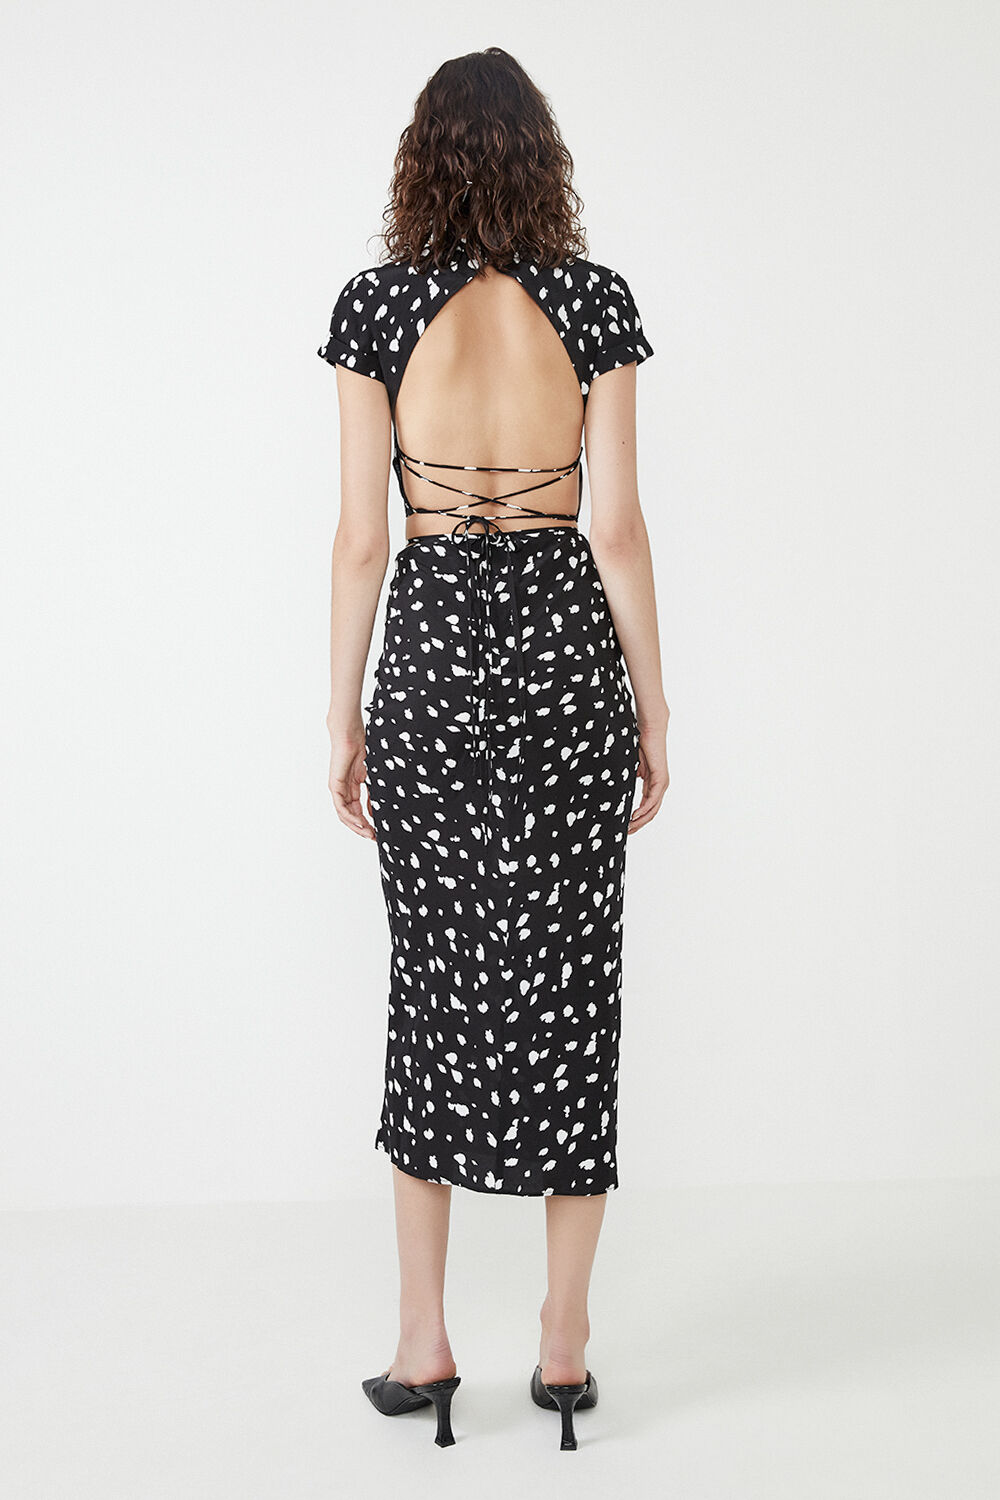 BACKLESS ABSTRACT SPOT TOP in colour TAP SHOE